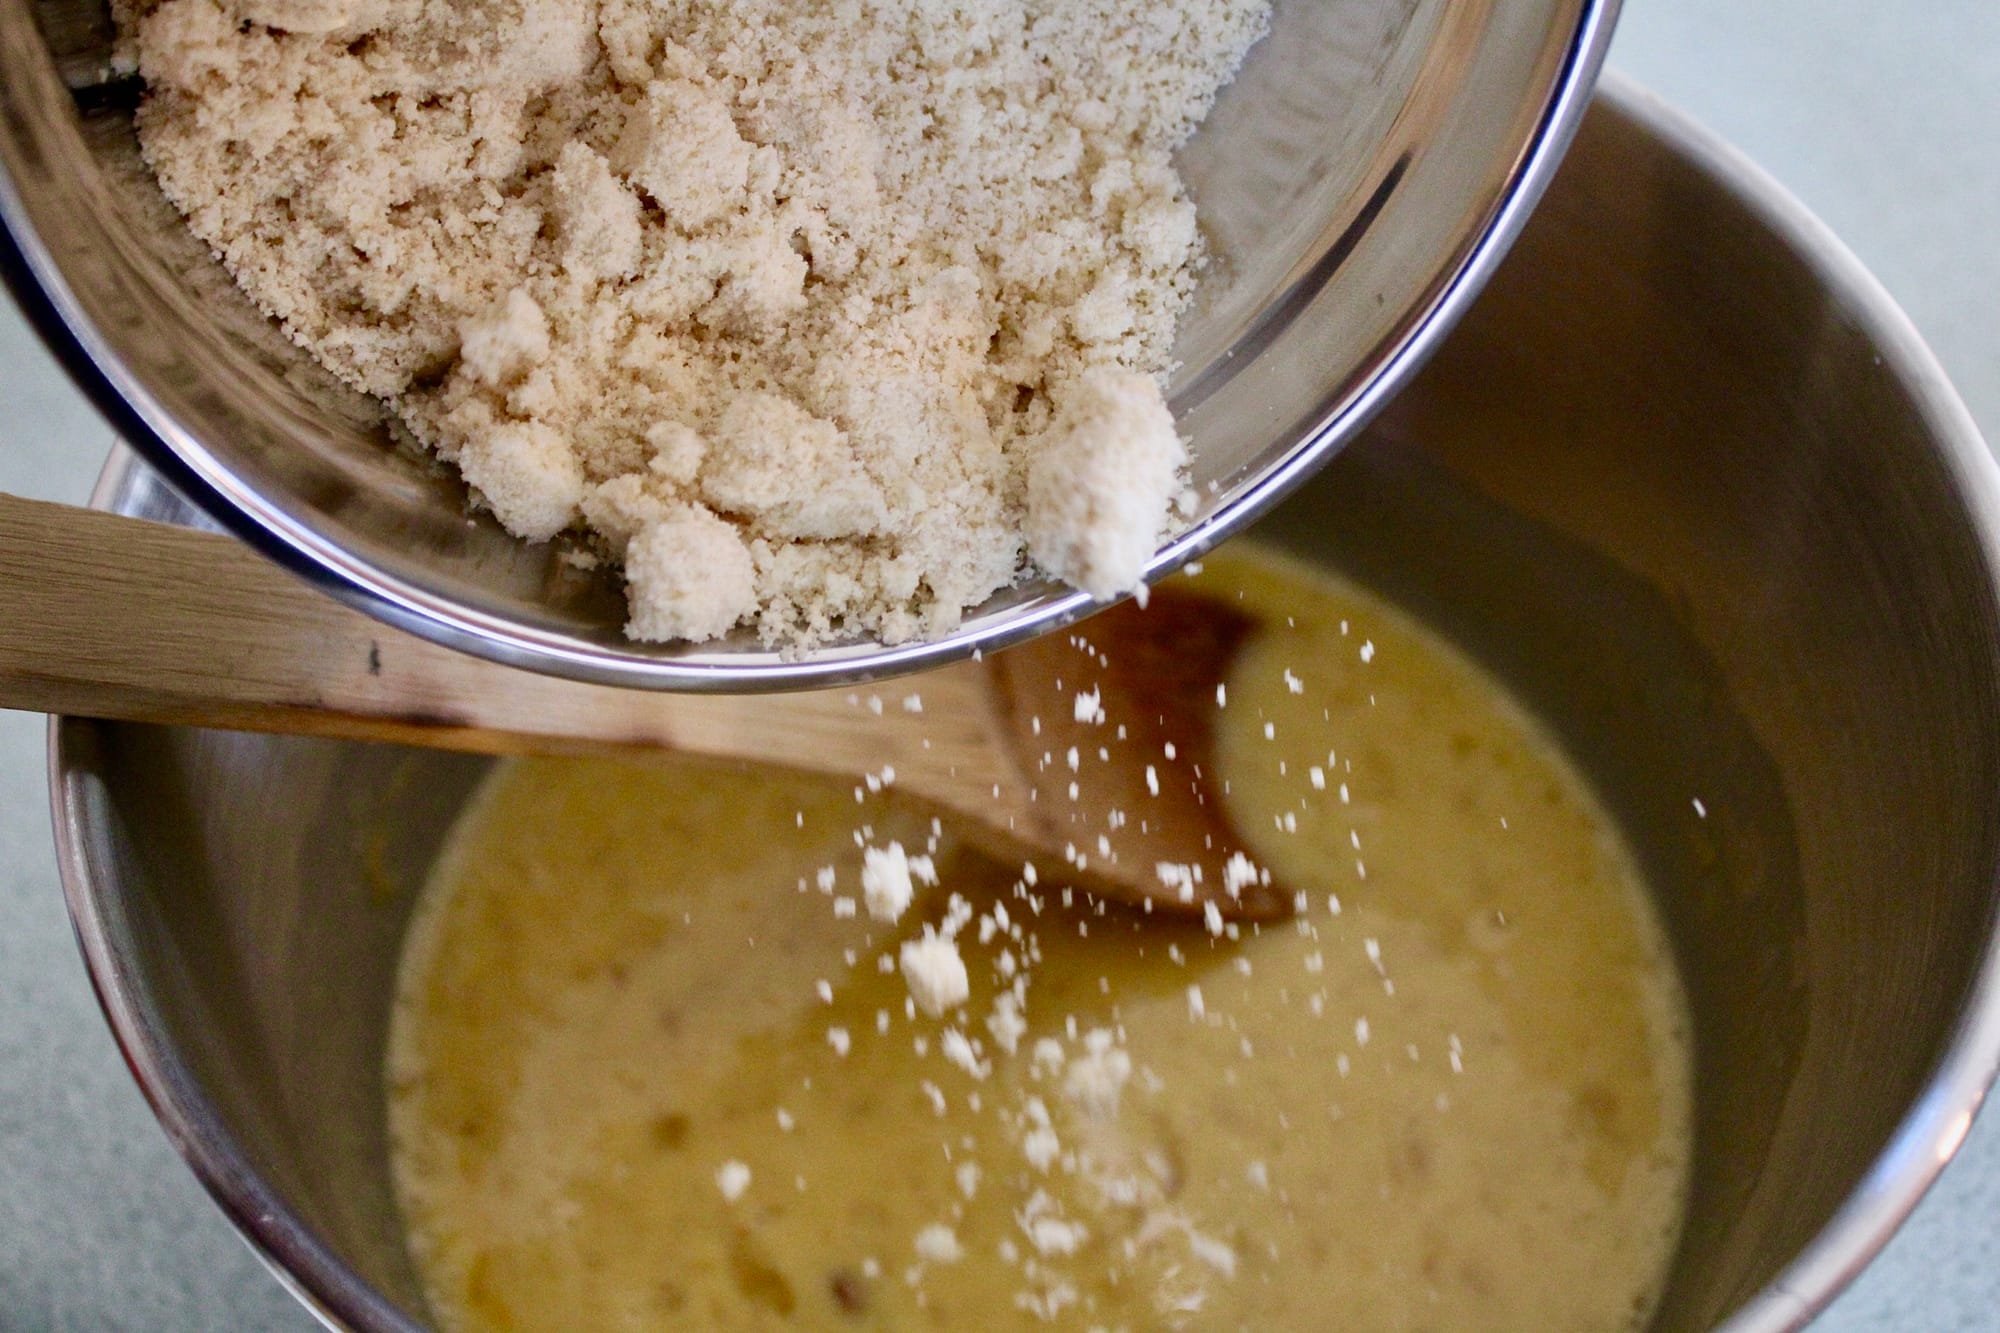 Adding dry ingredients for banana bread.